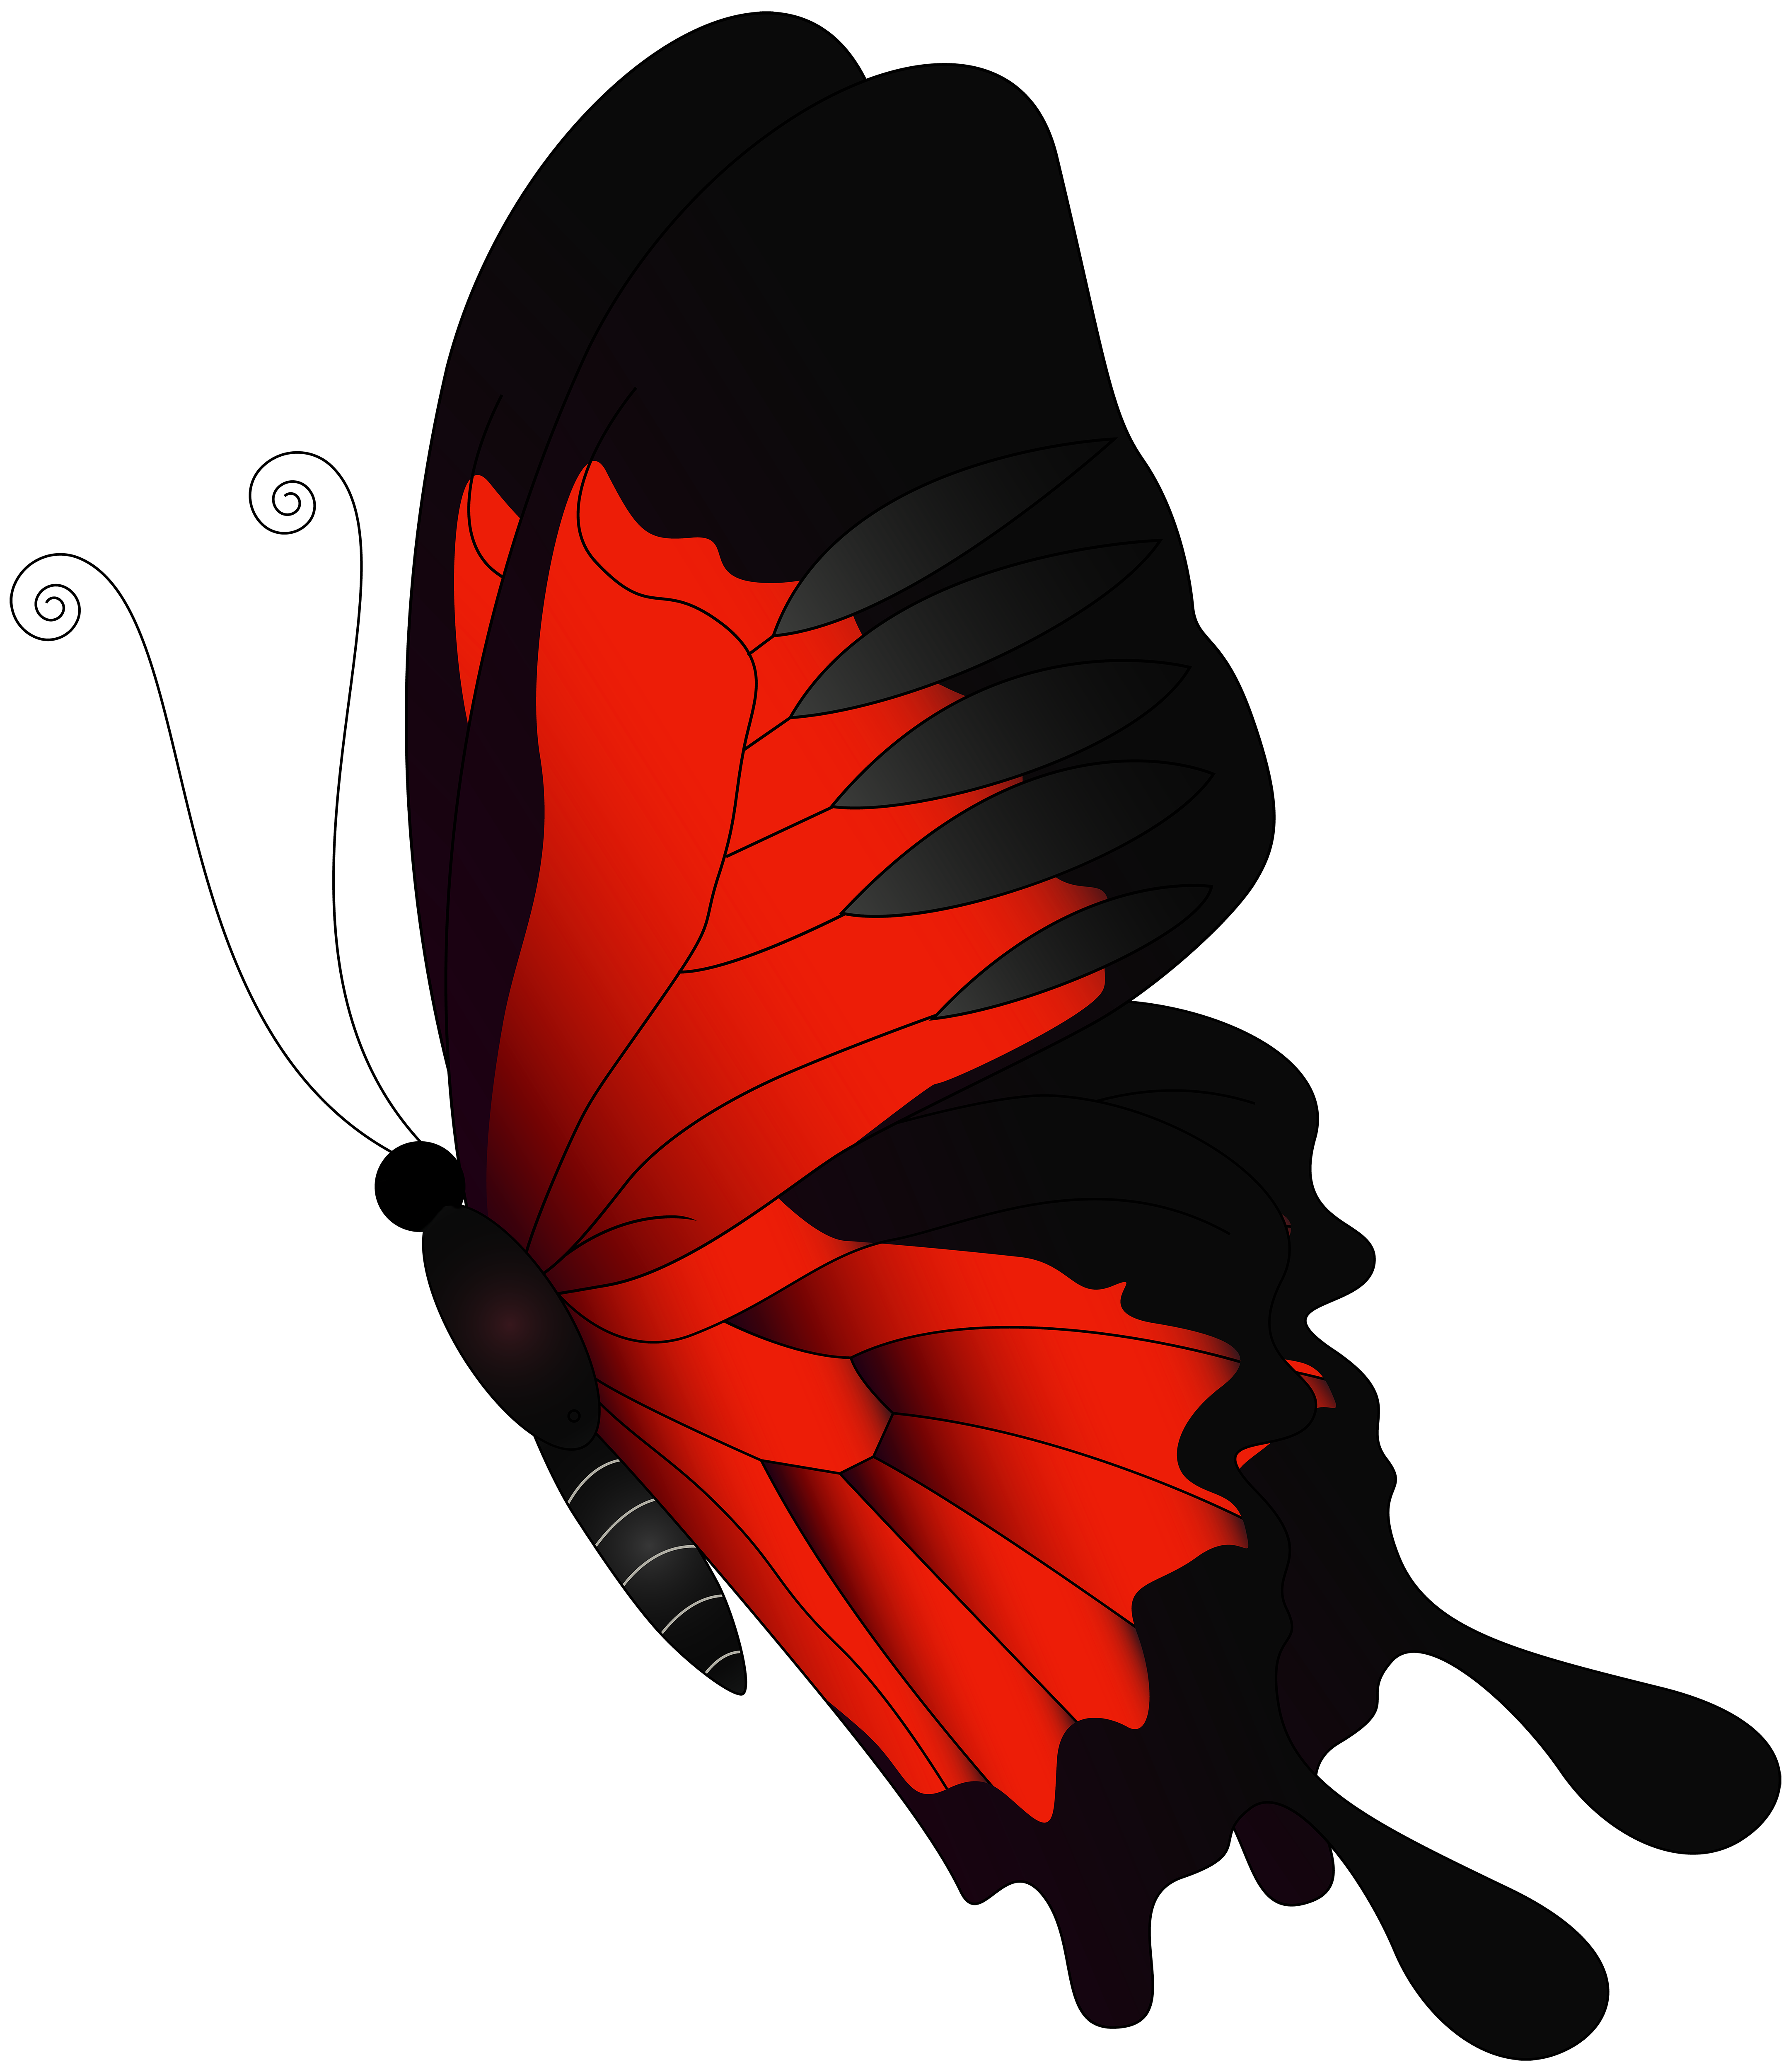 https://gallery.yopriceville.com/var/albums/Free-Clipart-Pictures/Butterflies-PNG/Red_Flying_Butterfly_PNG_Clip_Art.png?m=1507690502